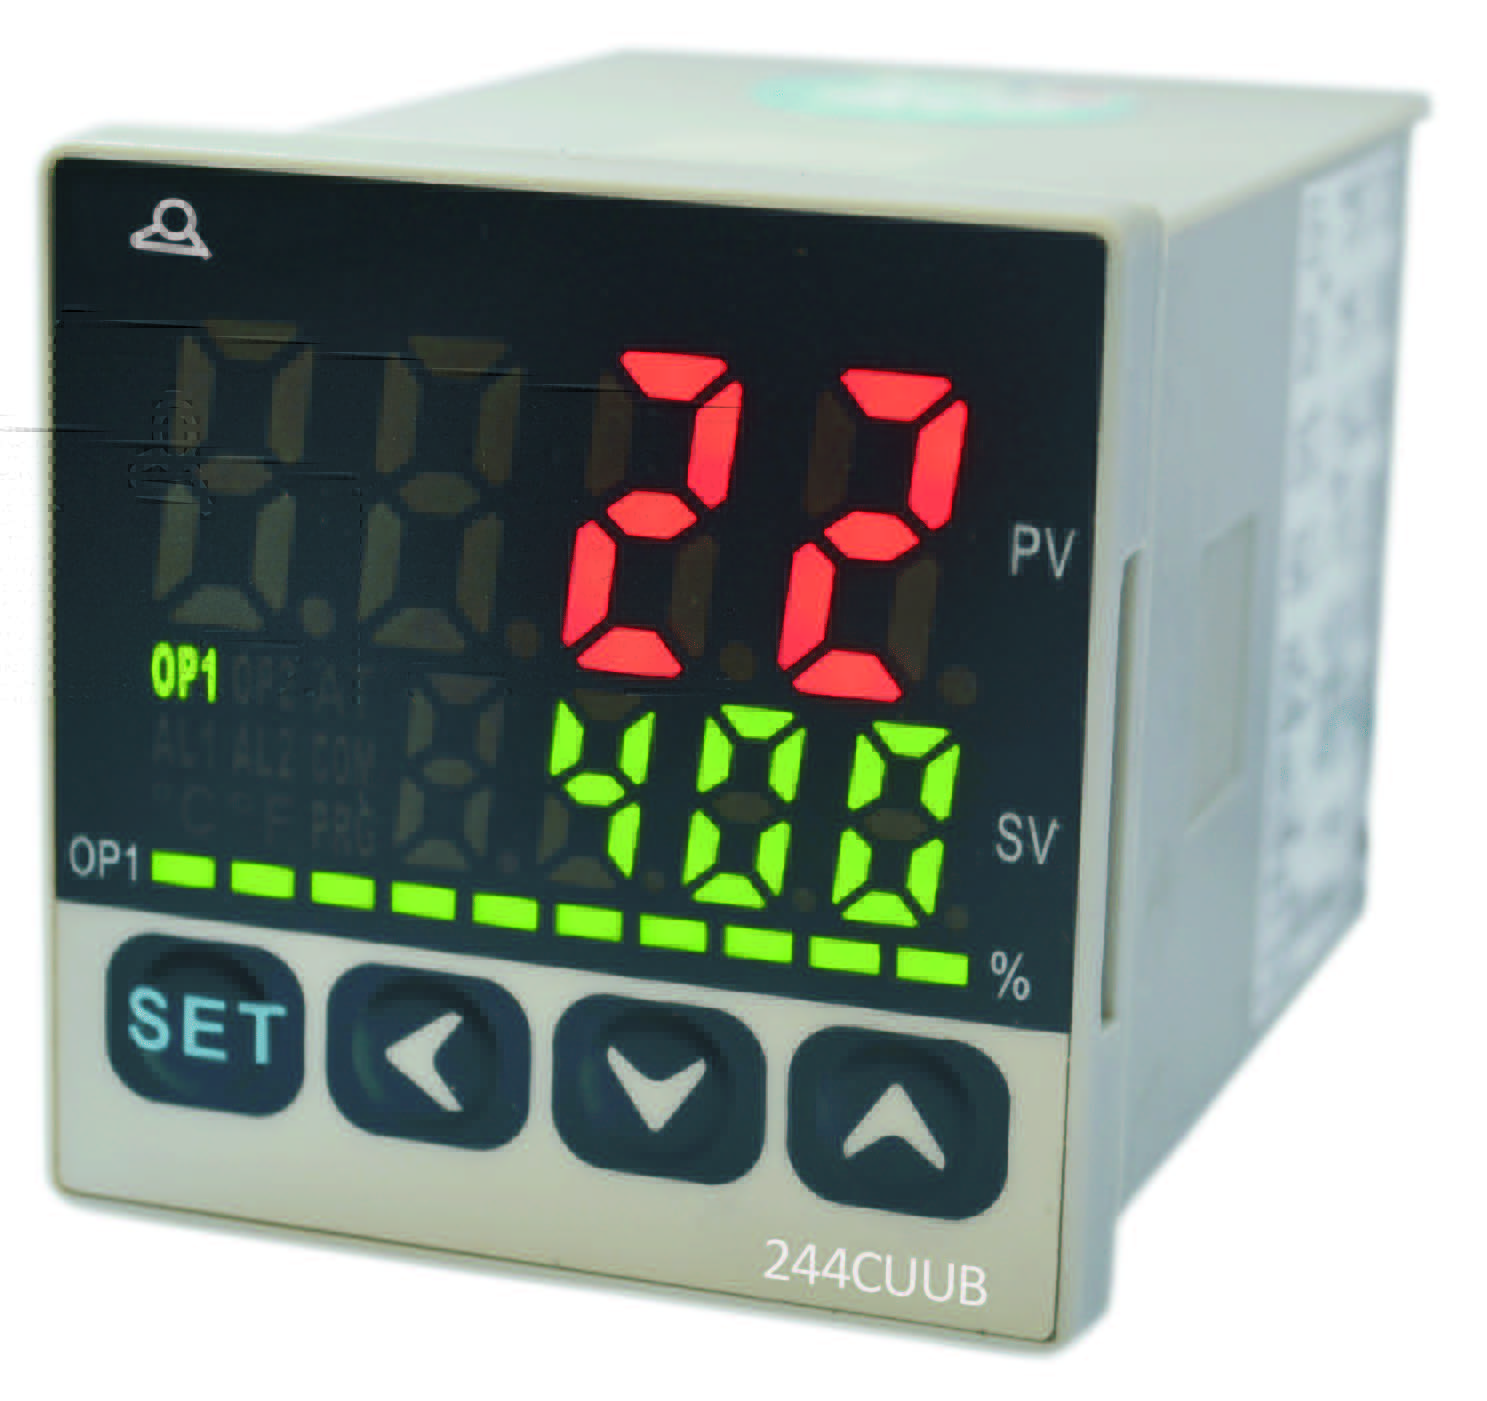 48 x 48, Intelligent PID Temperature Controller, double display,  multisensor, power relay and SSR output – JPC France